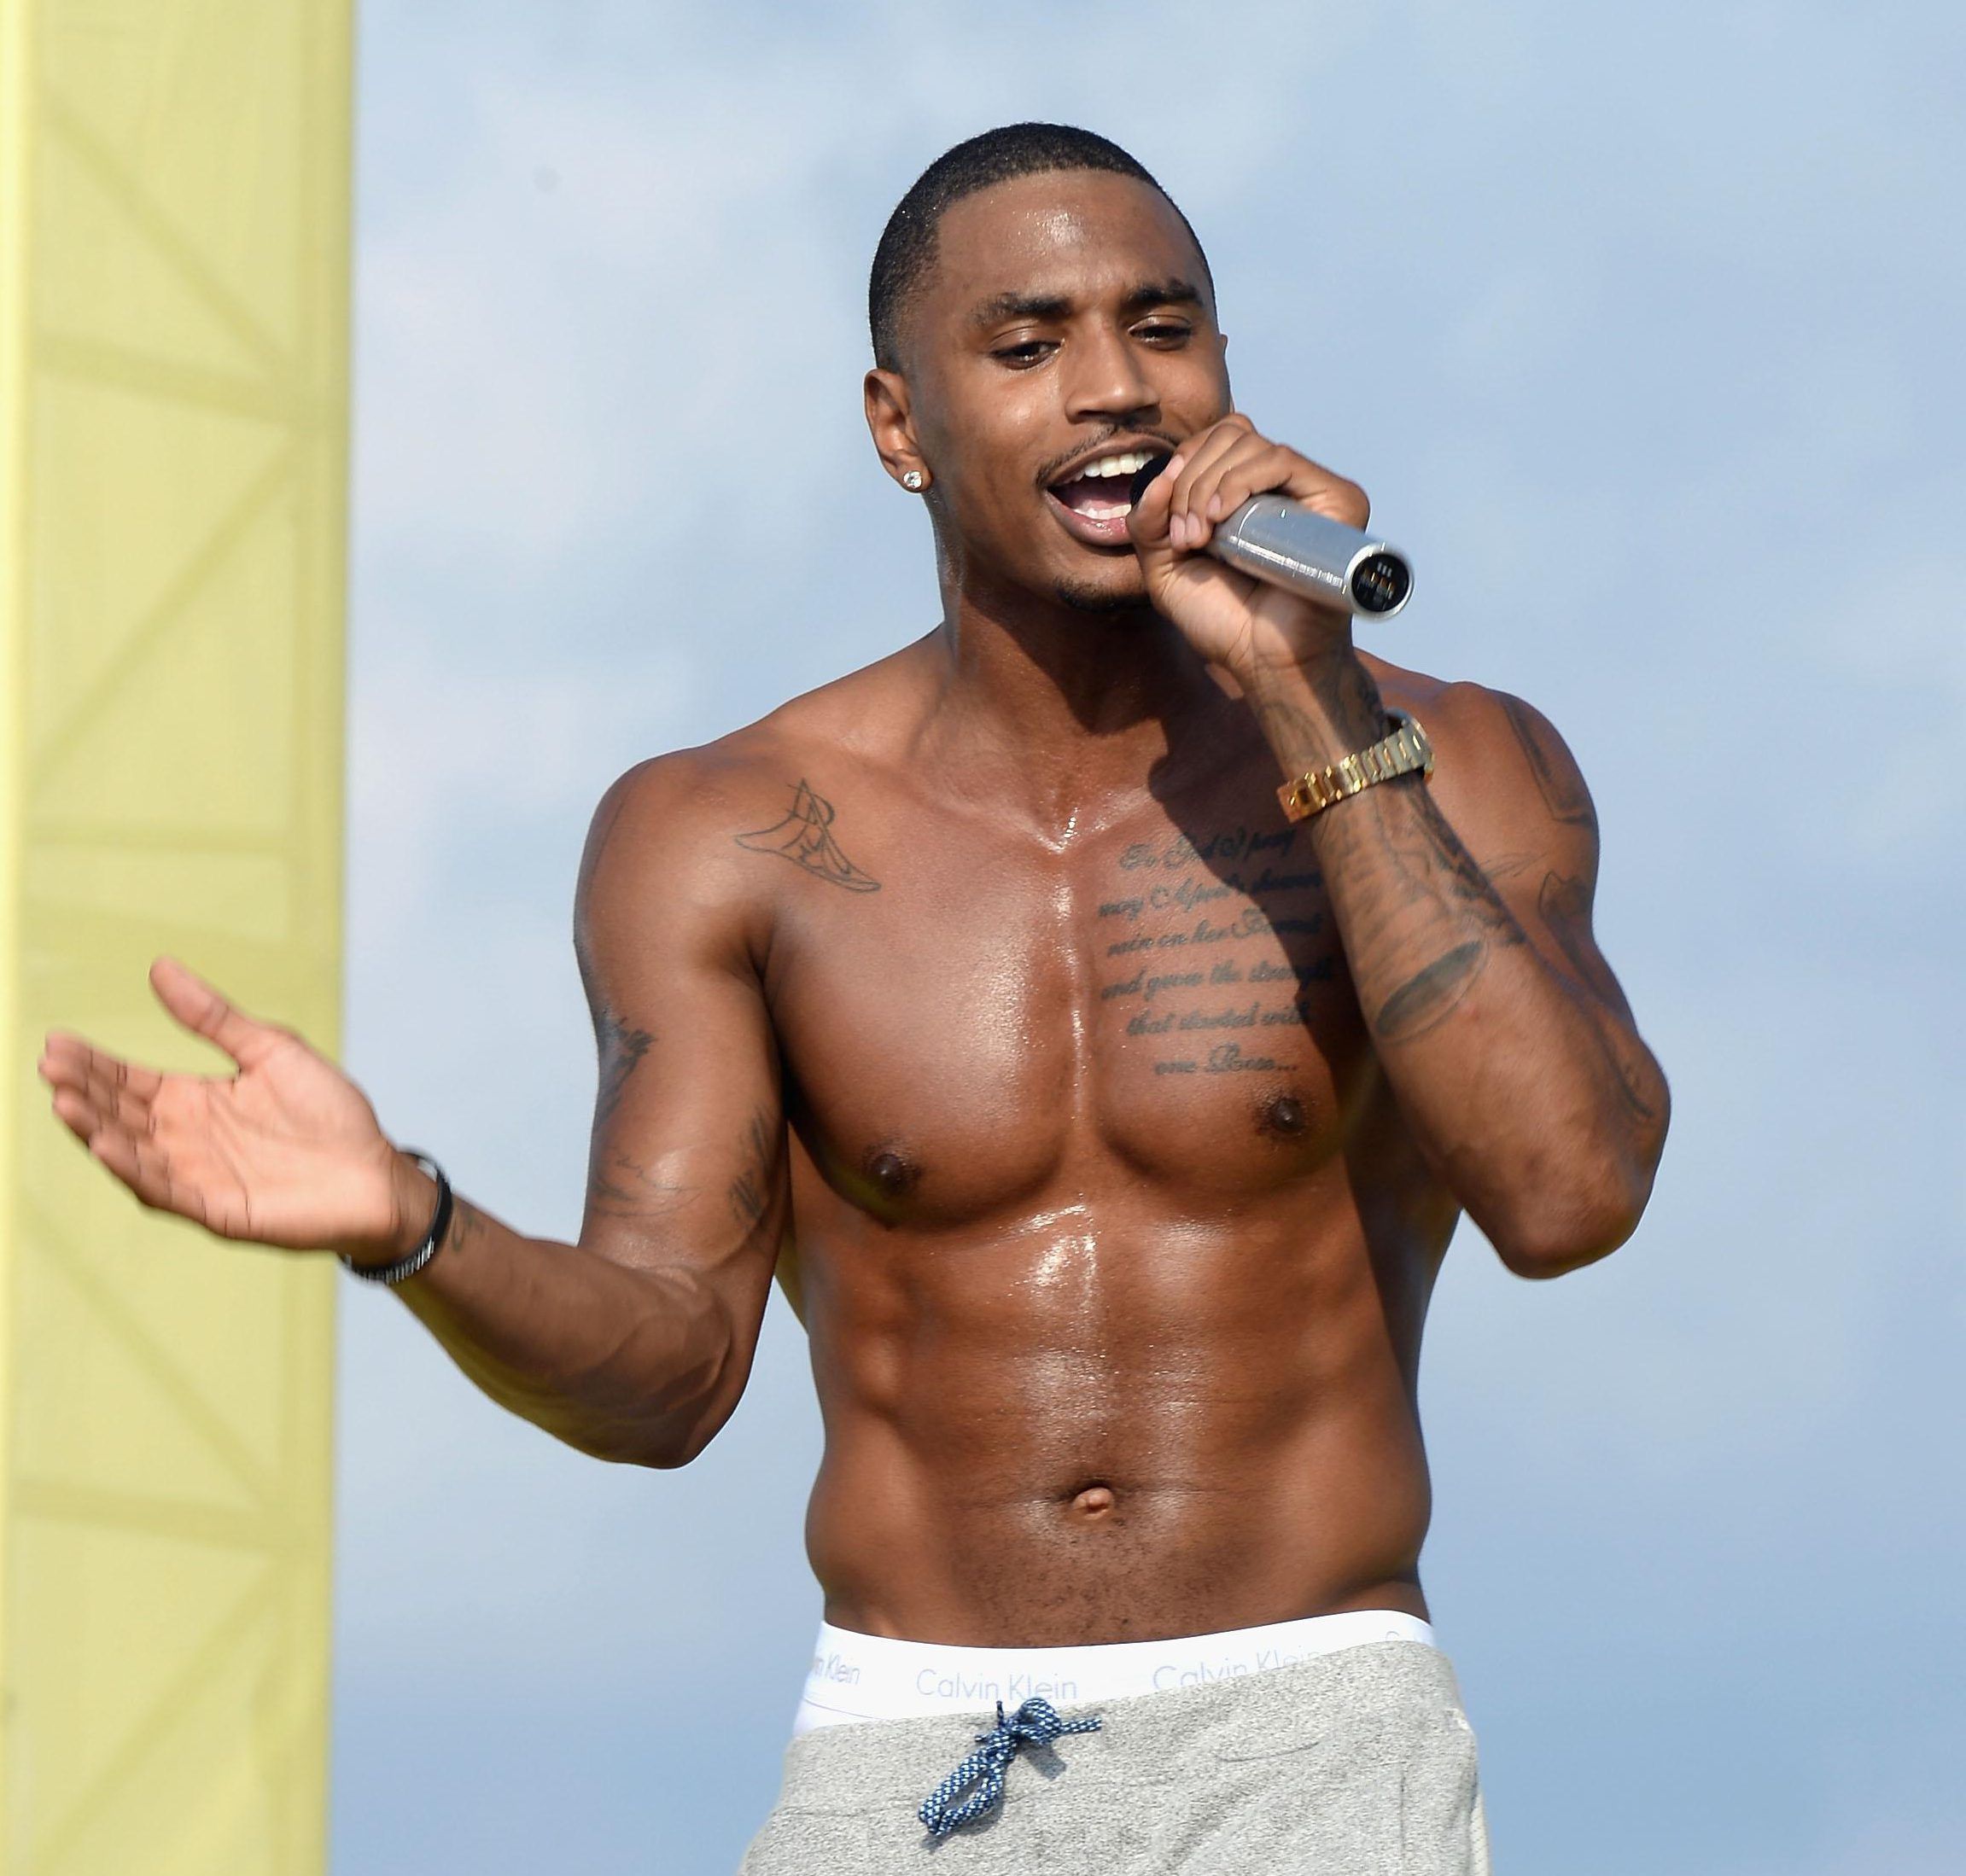 Trey Songz facing new civil lawsuit stemming from an alleged sexual assault incident